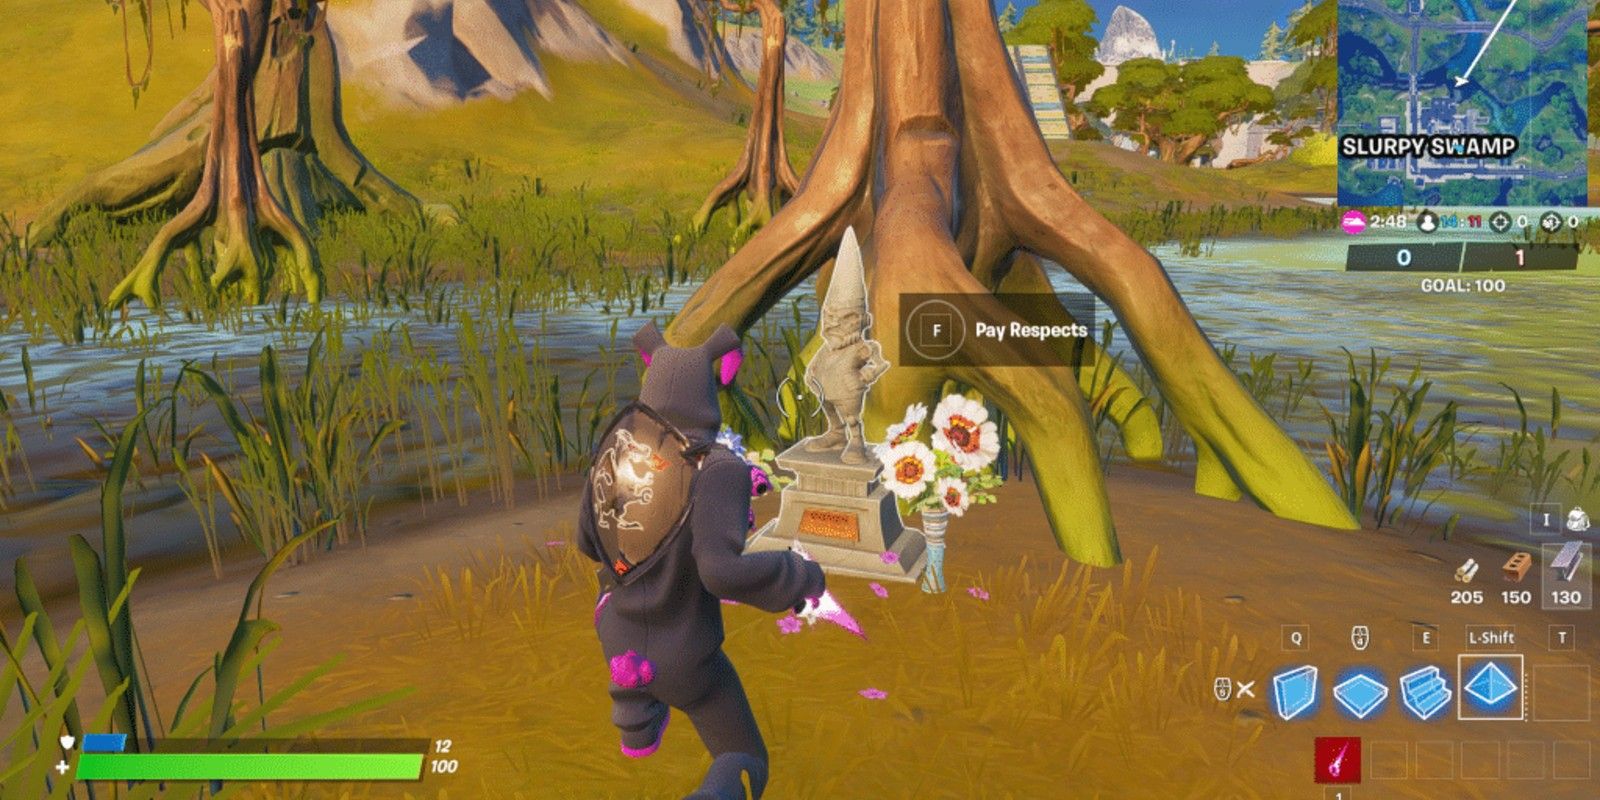 A player pays respects at the gnome's grave in Slurpy Swamp in Fortnite Season 4